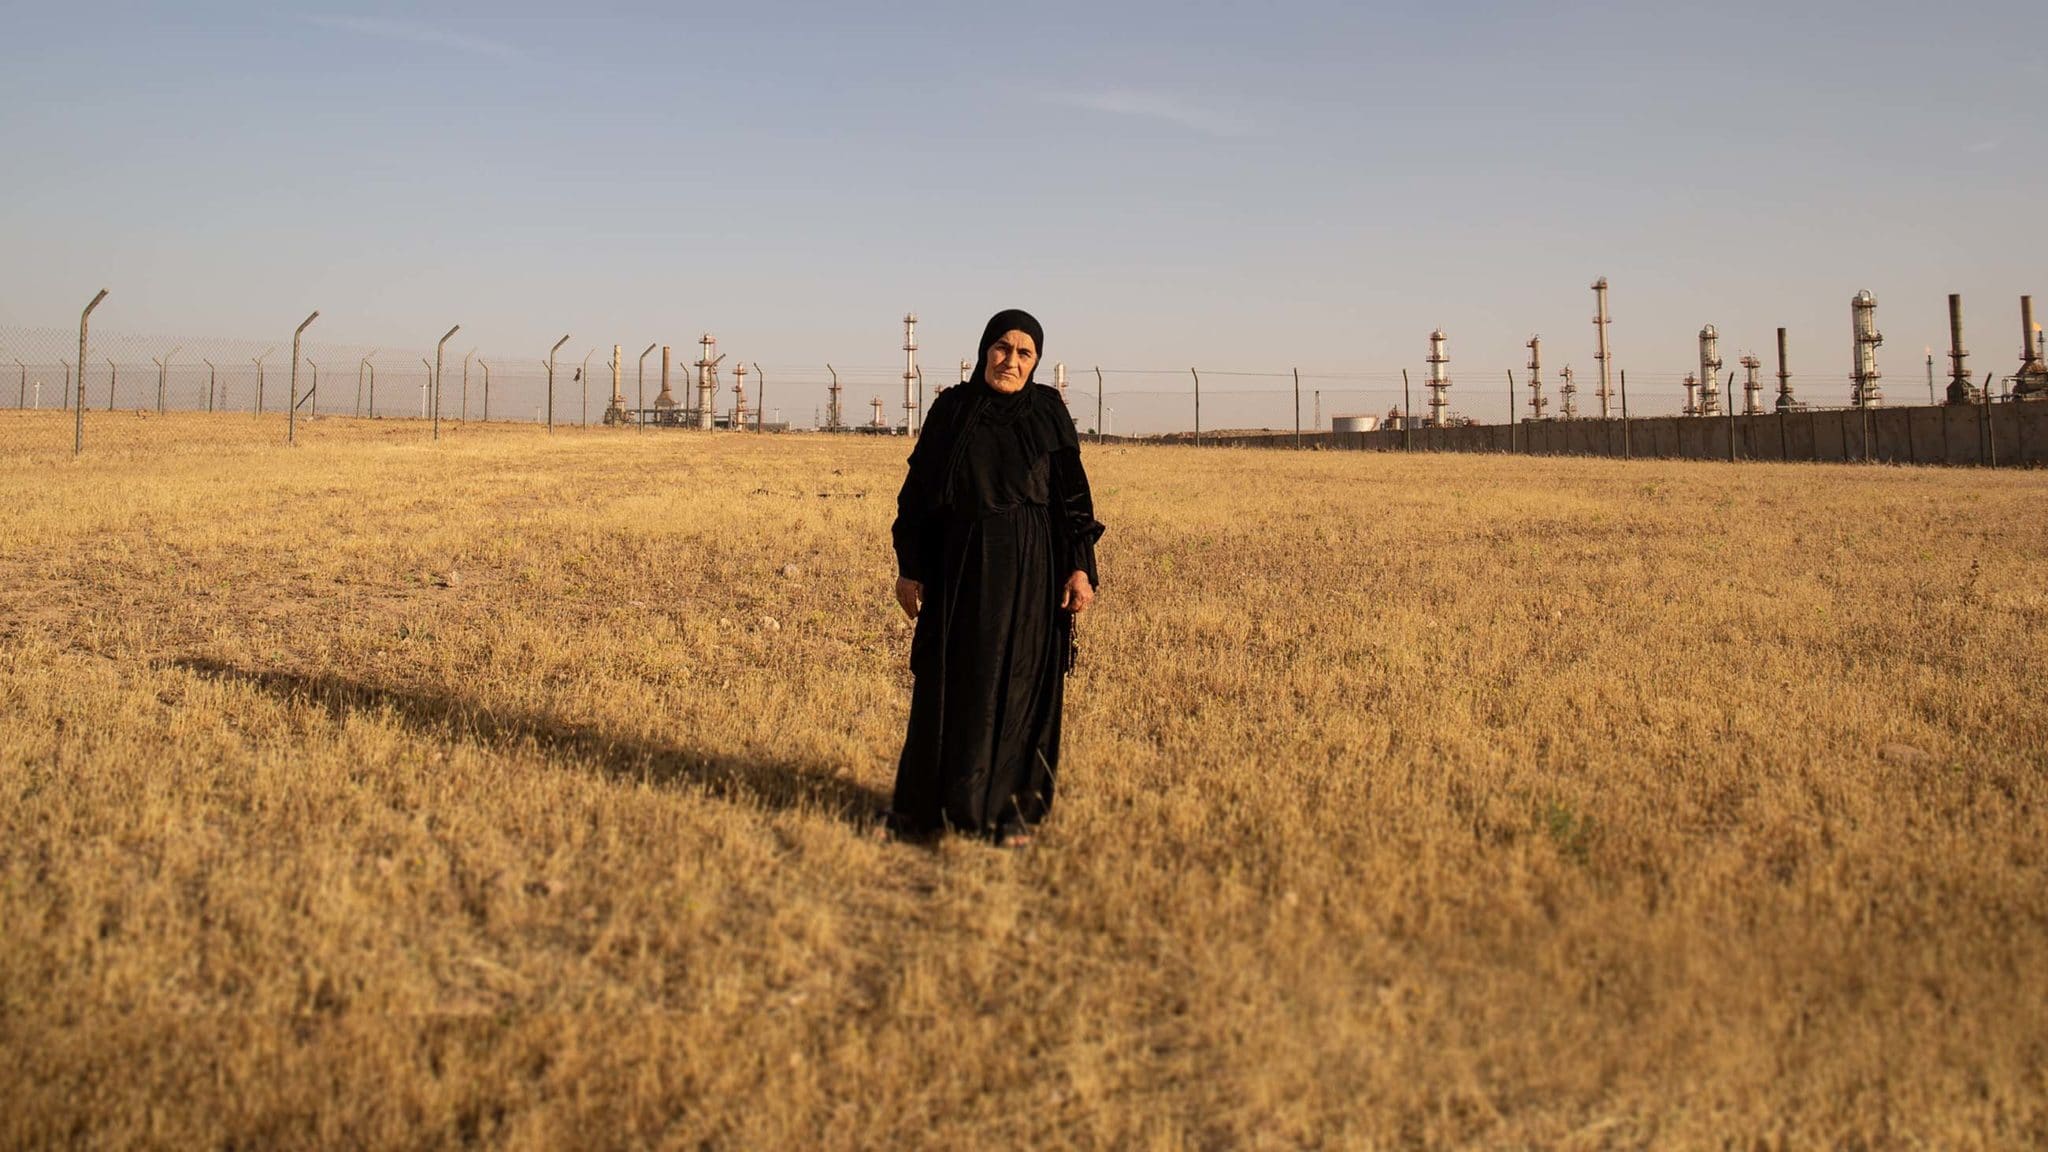 Kamila Rashid says an oil refinery now sits on what used to be her family's land. All photos by LYNZY BILLING for UNDARK